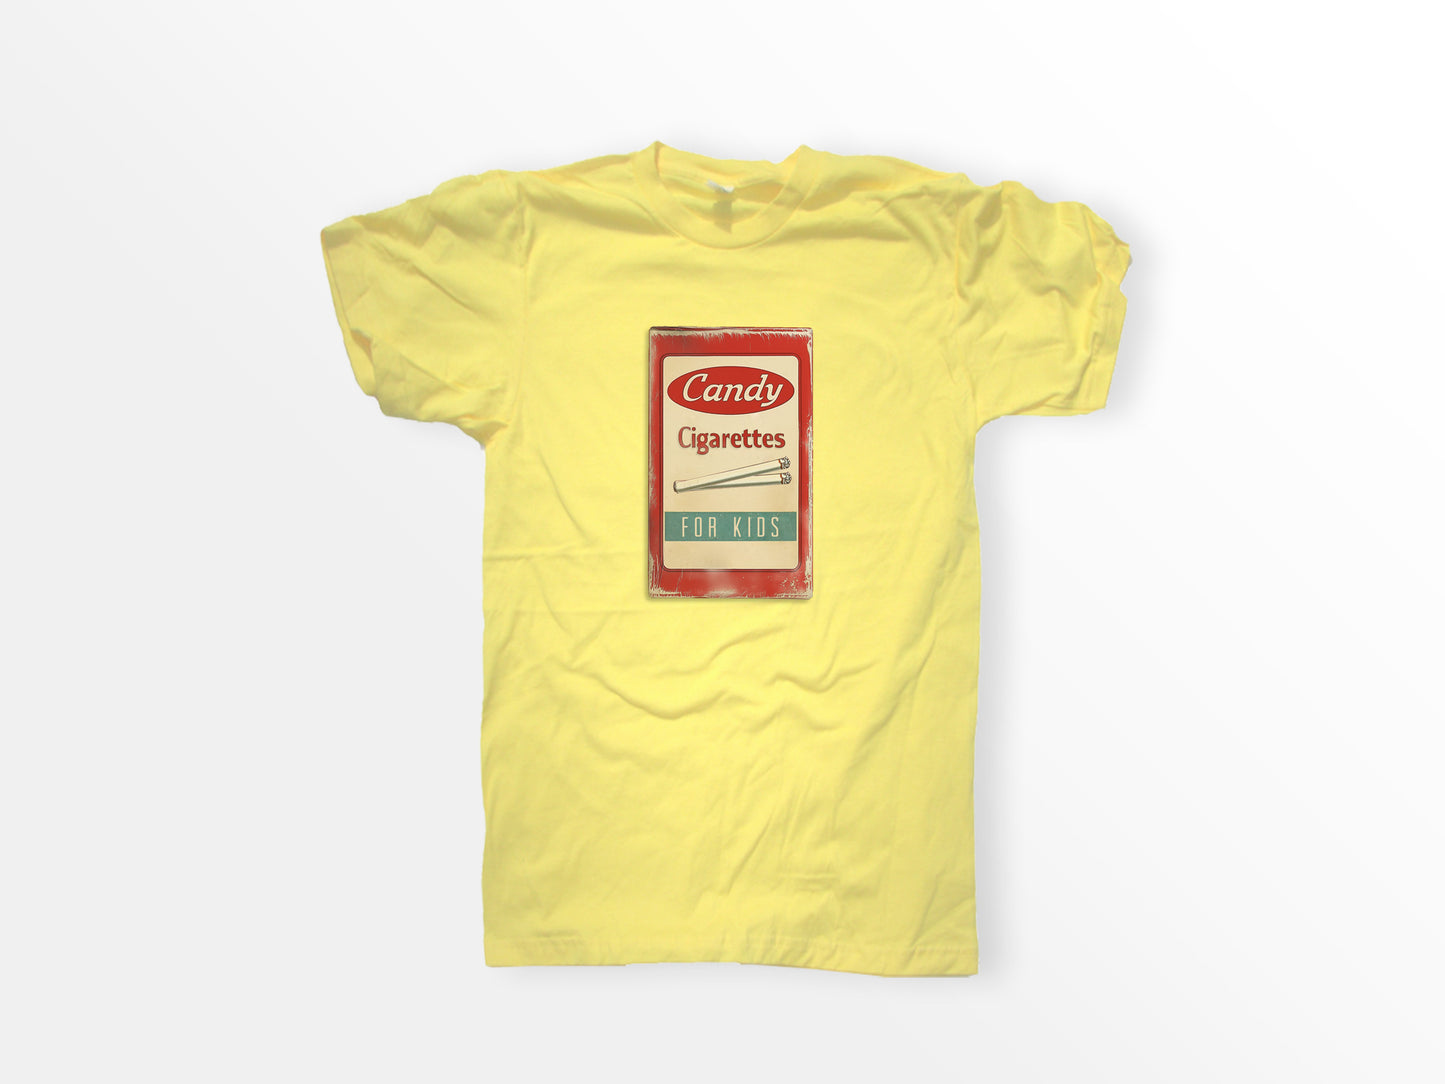 ShirtLoaf Vintage Candy Cigarettes Shirt Printed on Bella Canvas Short Sleeve YELLOW t-Shirt